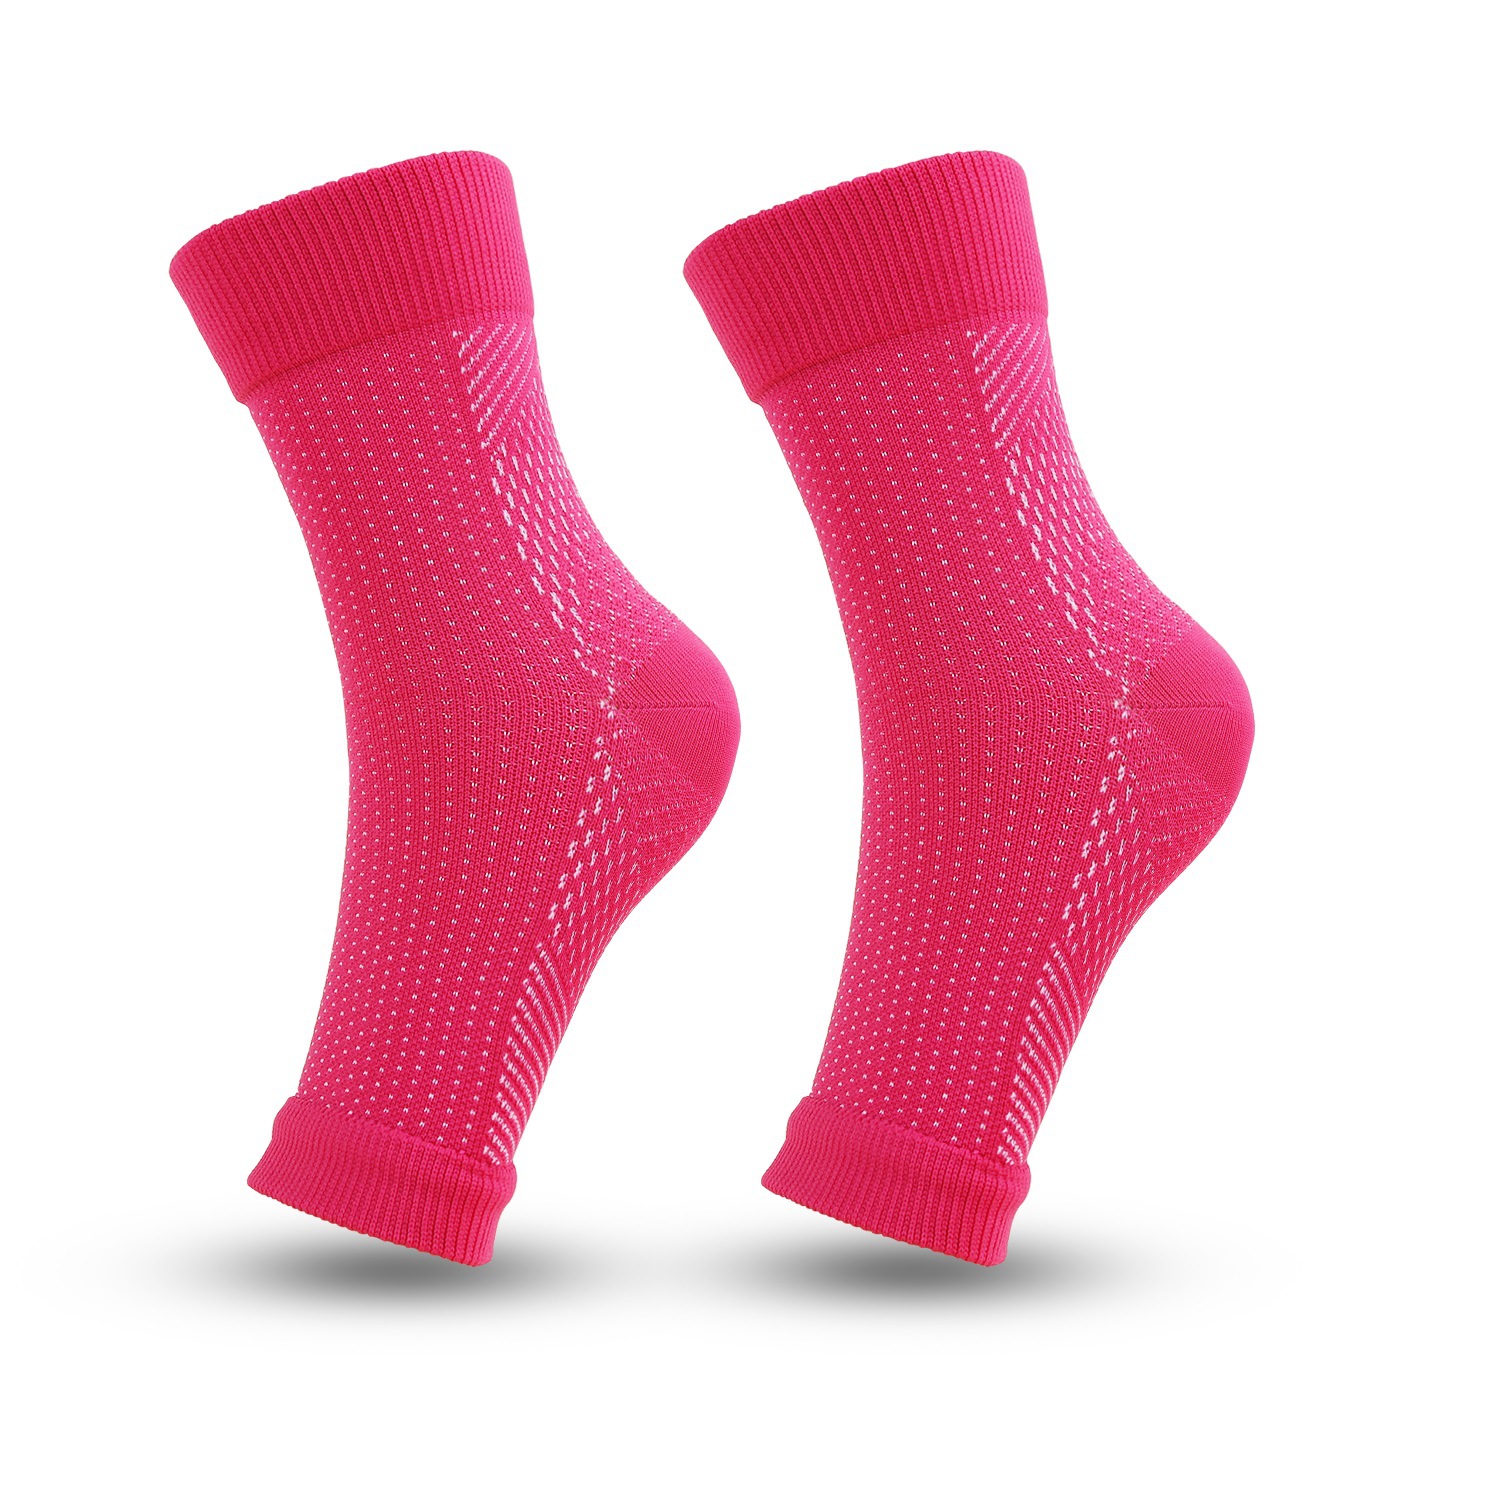 Pressure Ankle and Wrist Guard Compression Socks Anti Fatigue Compression Foot Sleeve in Stock